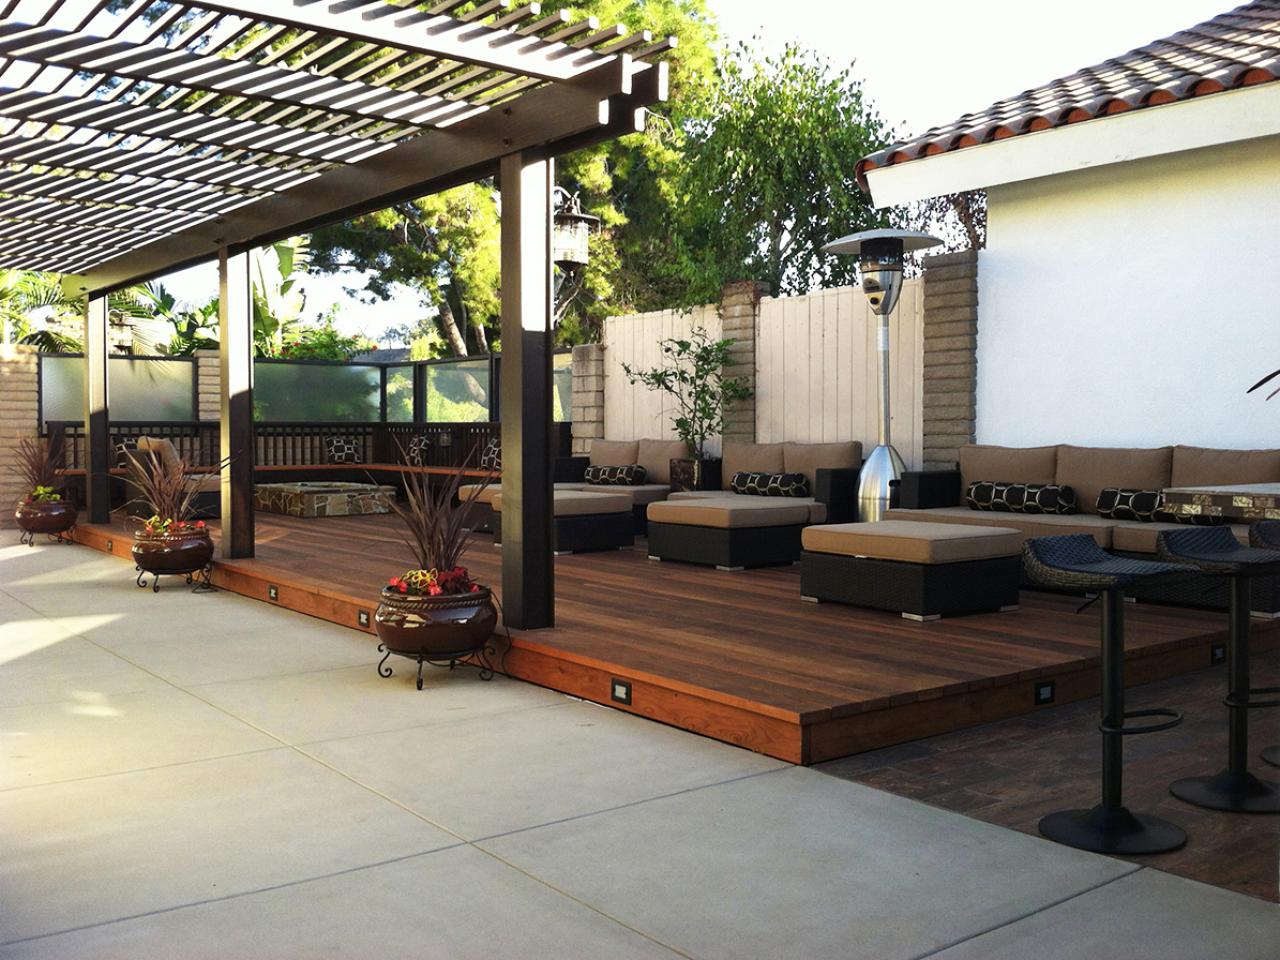 Outdoor Heaters Options And Solutions - Outdoor Patio Heating Options